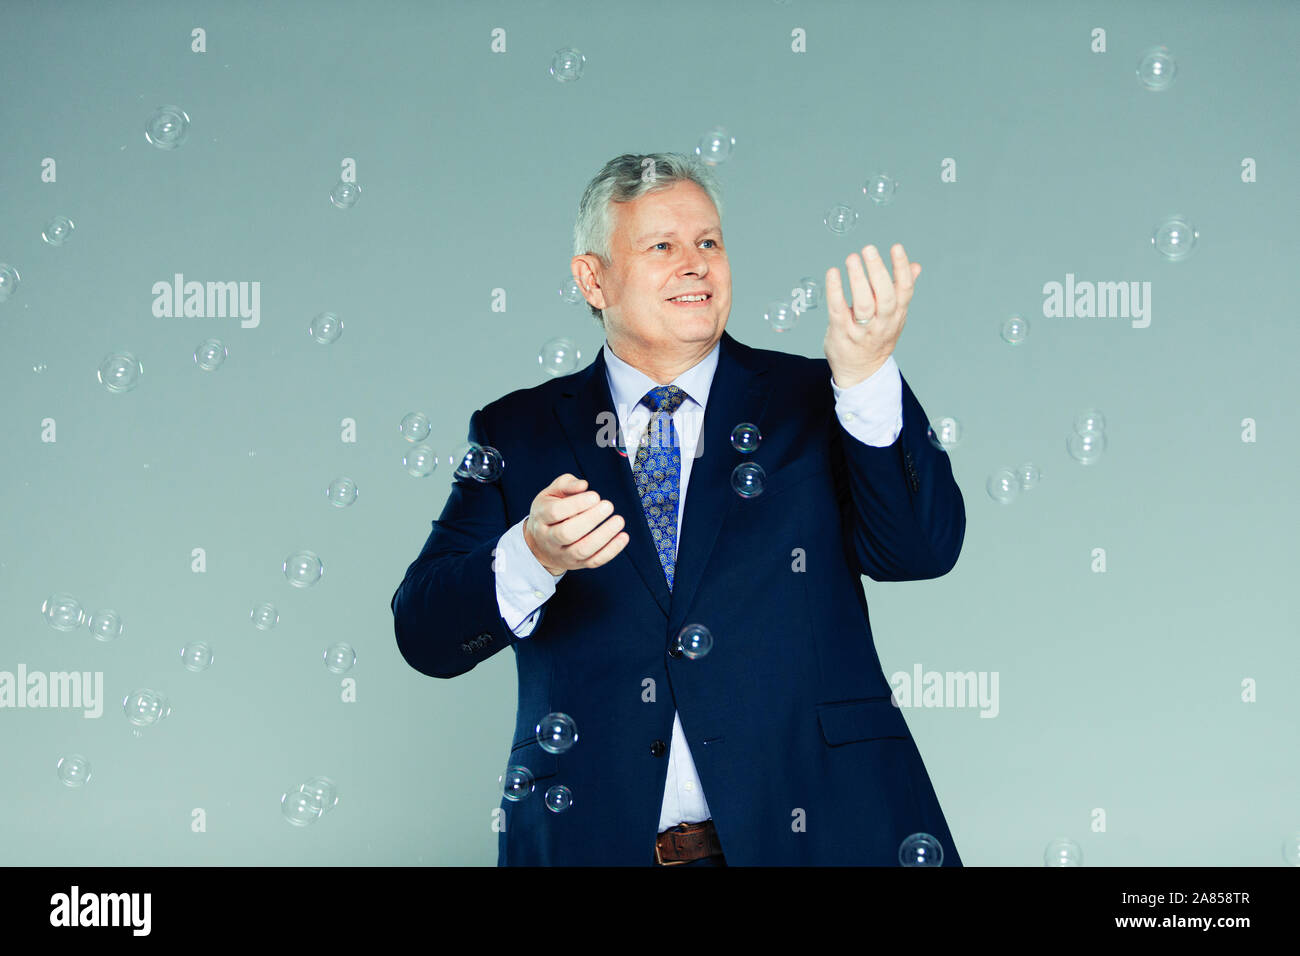 Playful businessman with bubbles Stock Photo